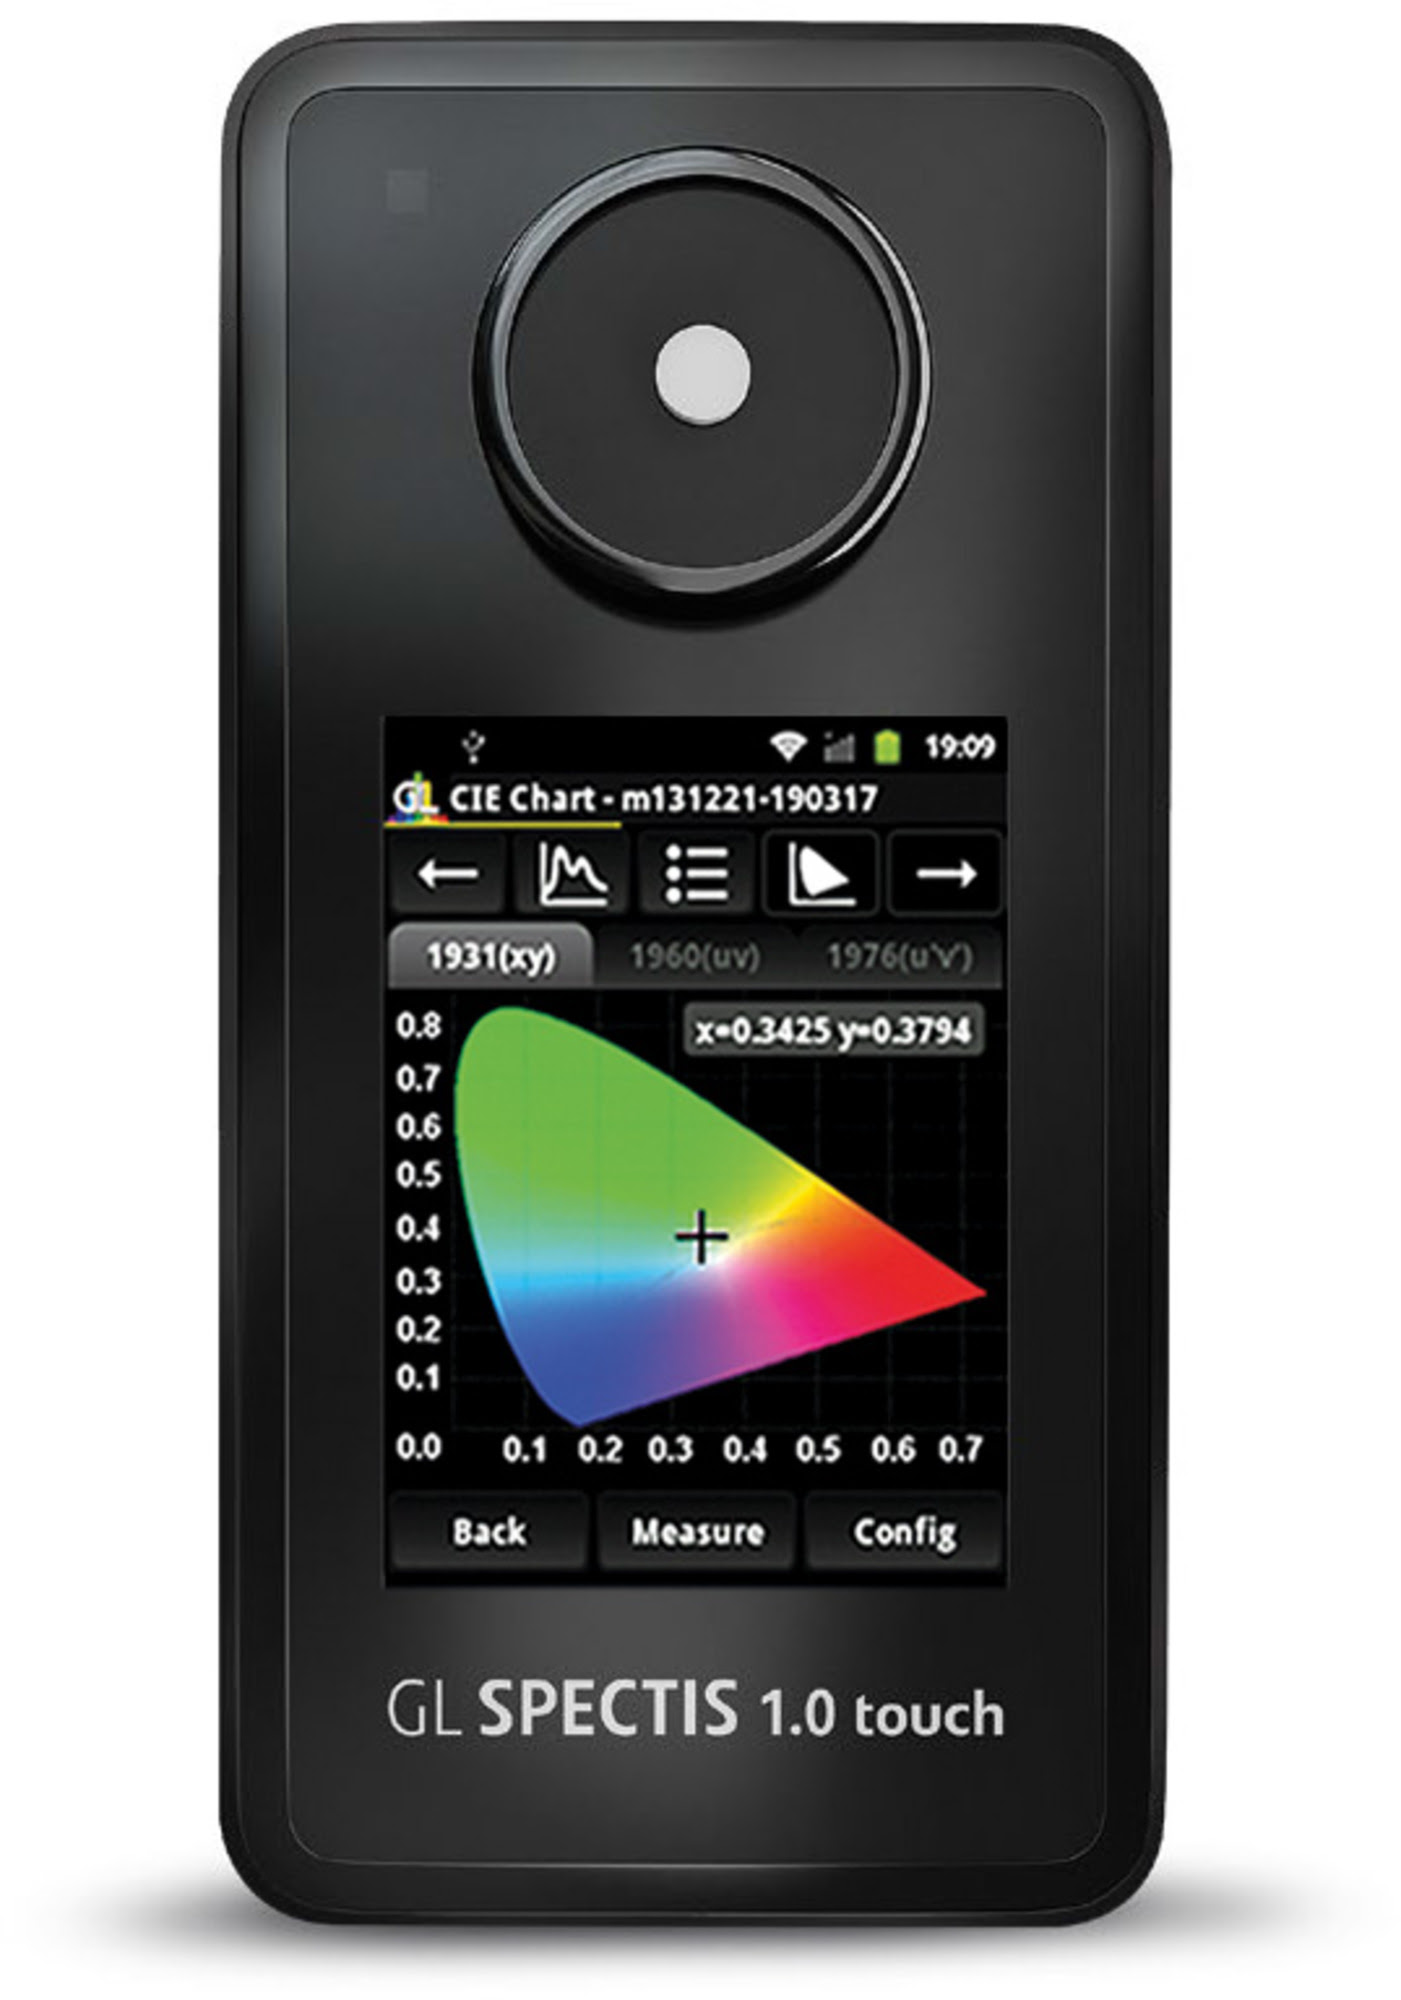 GL SPECTIS 1.0 touch proGraphic